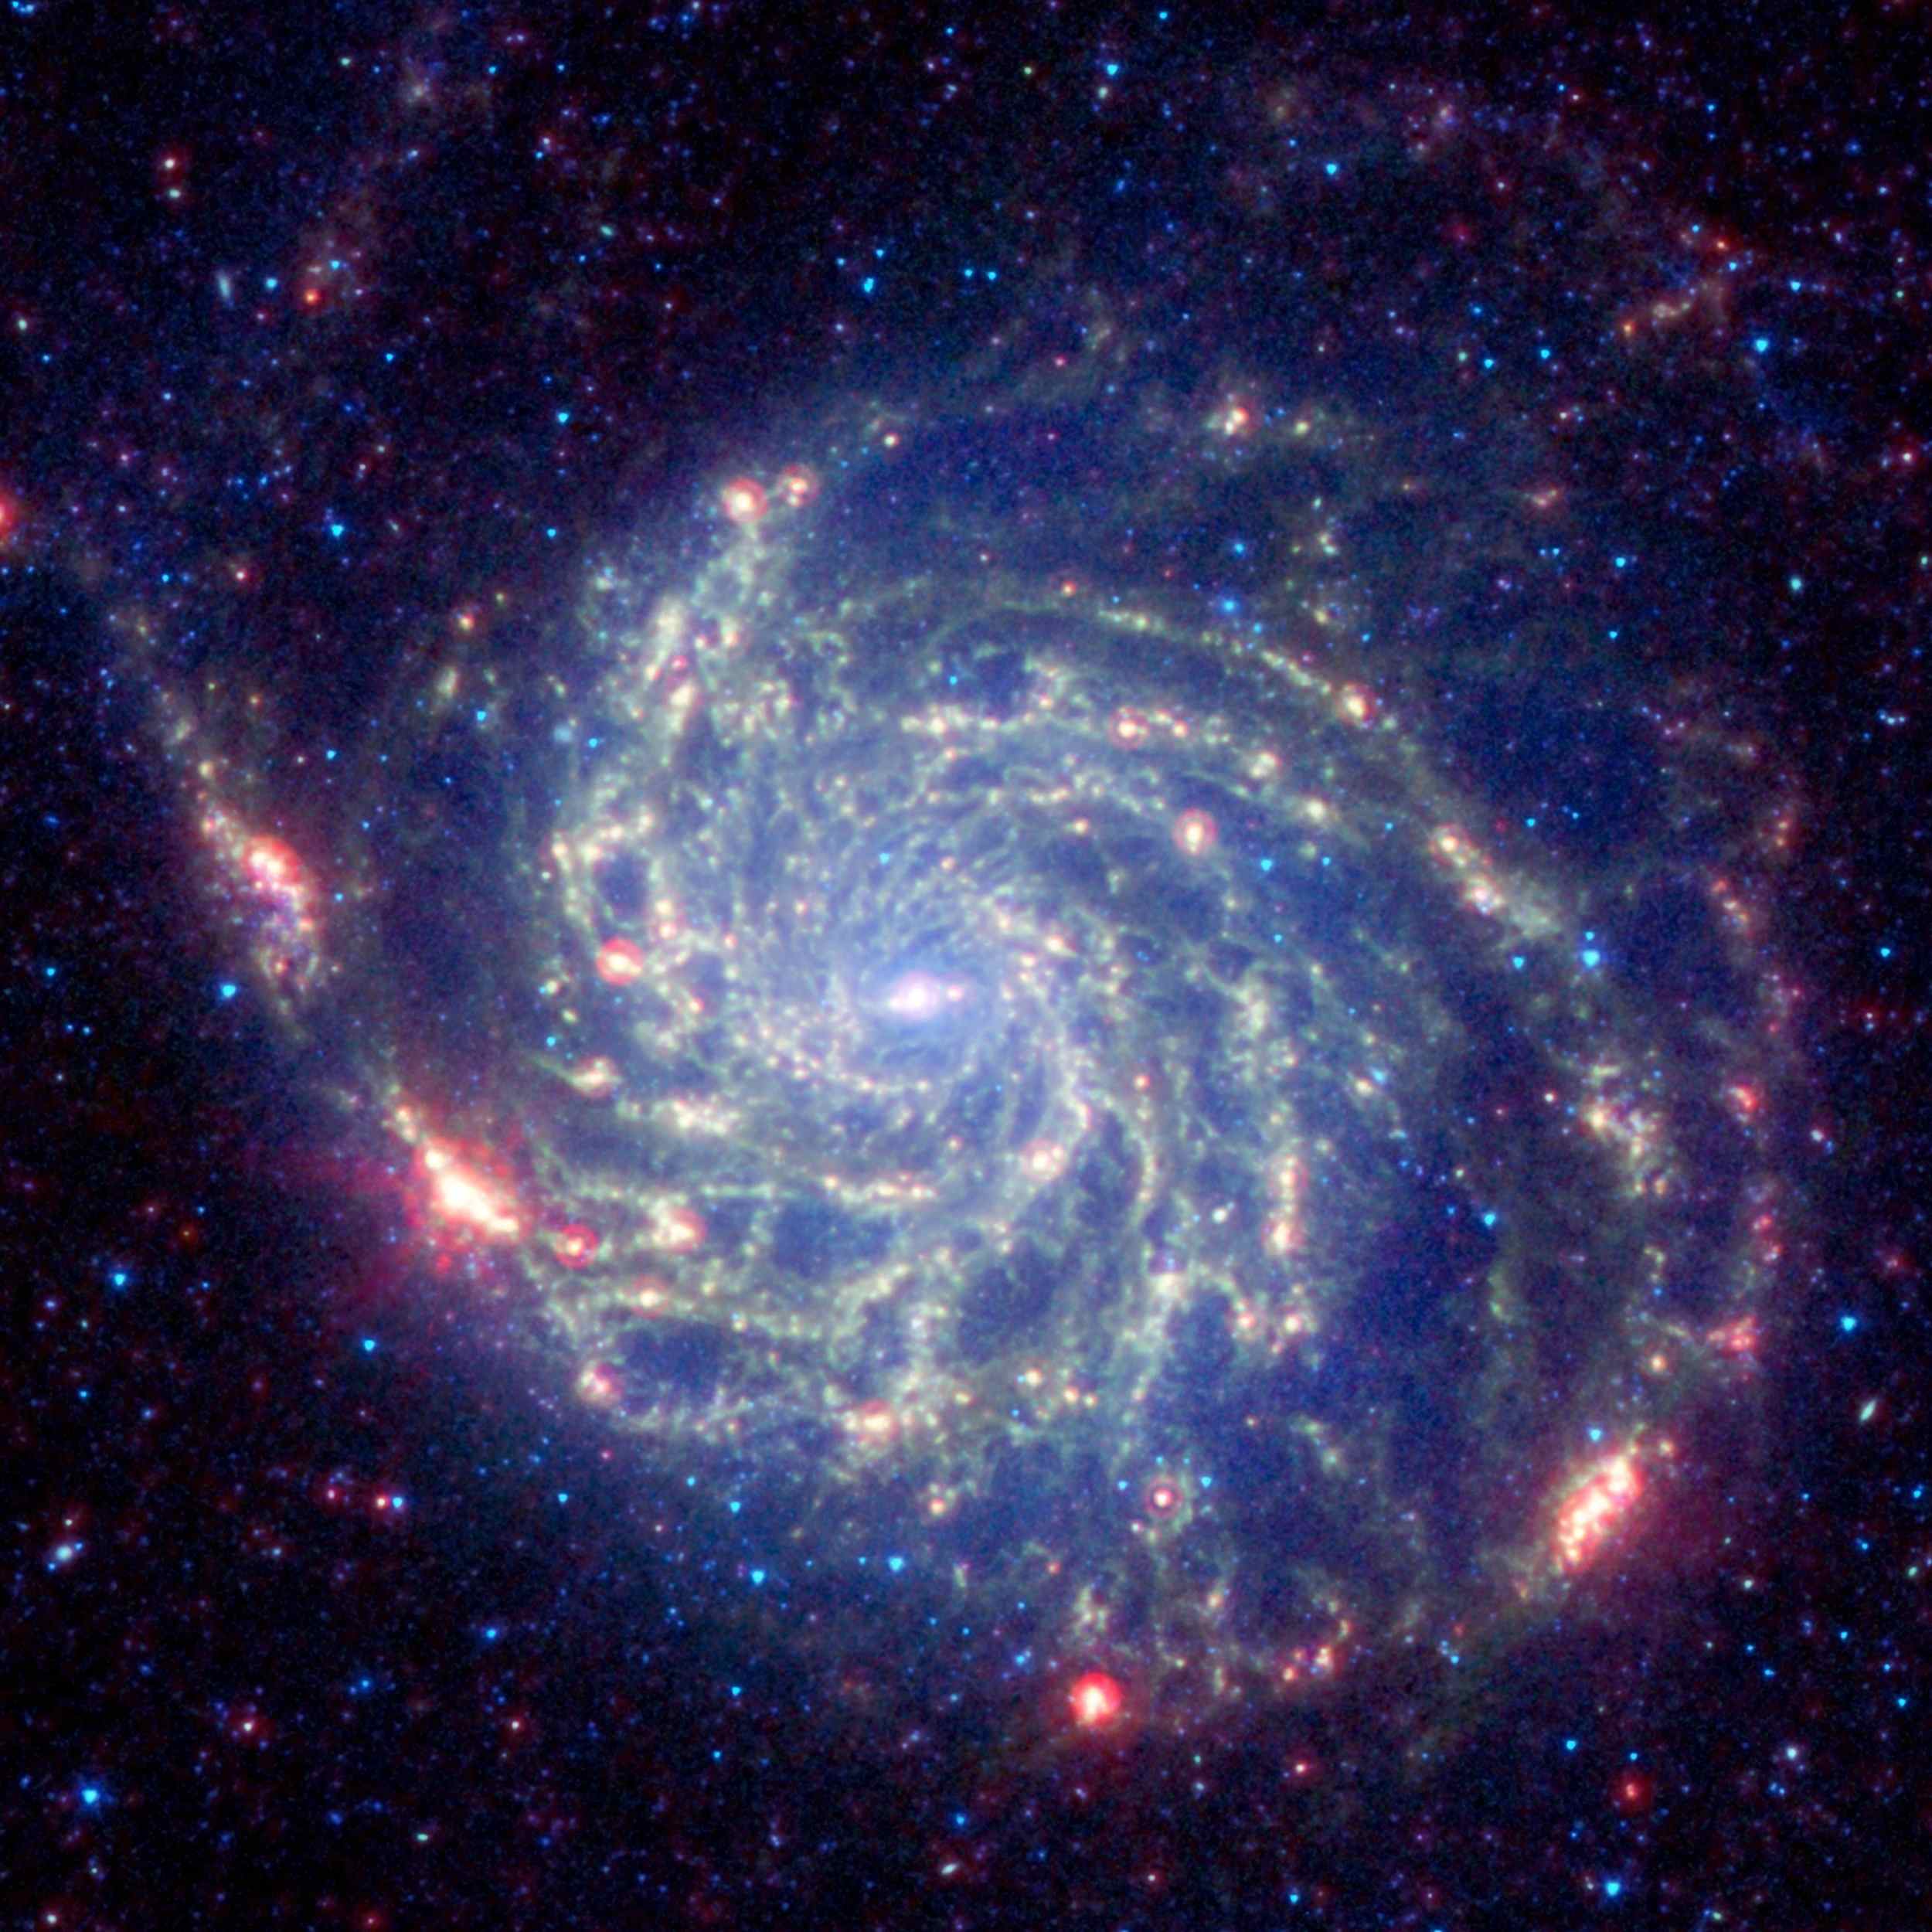 Space Images | Spitzer Space Telescope's View of Galaxy Messier 101